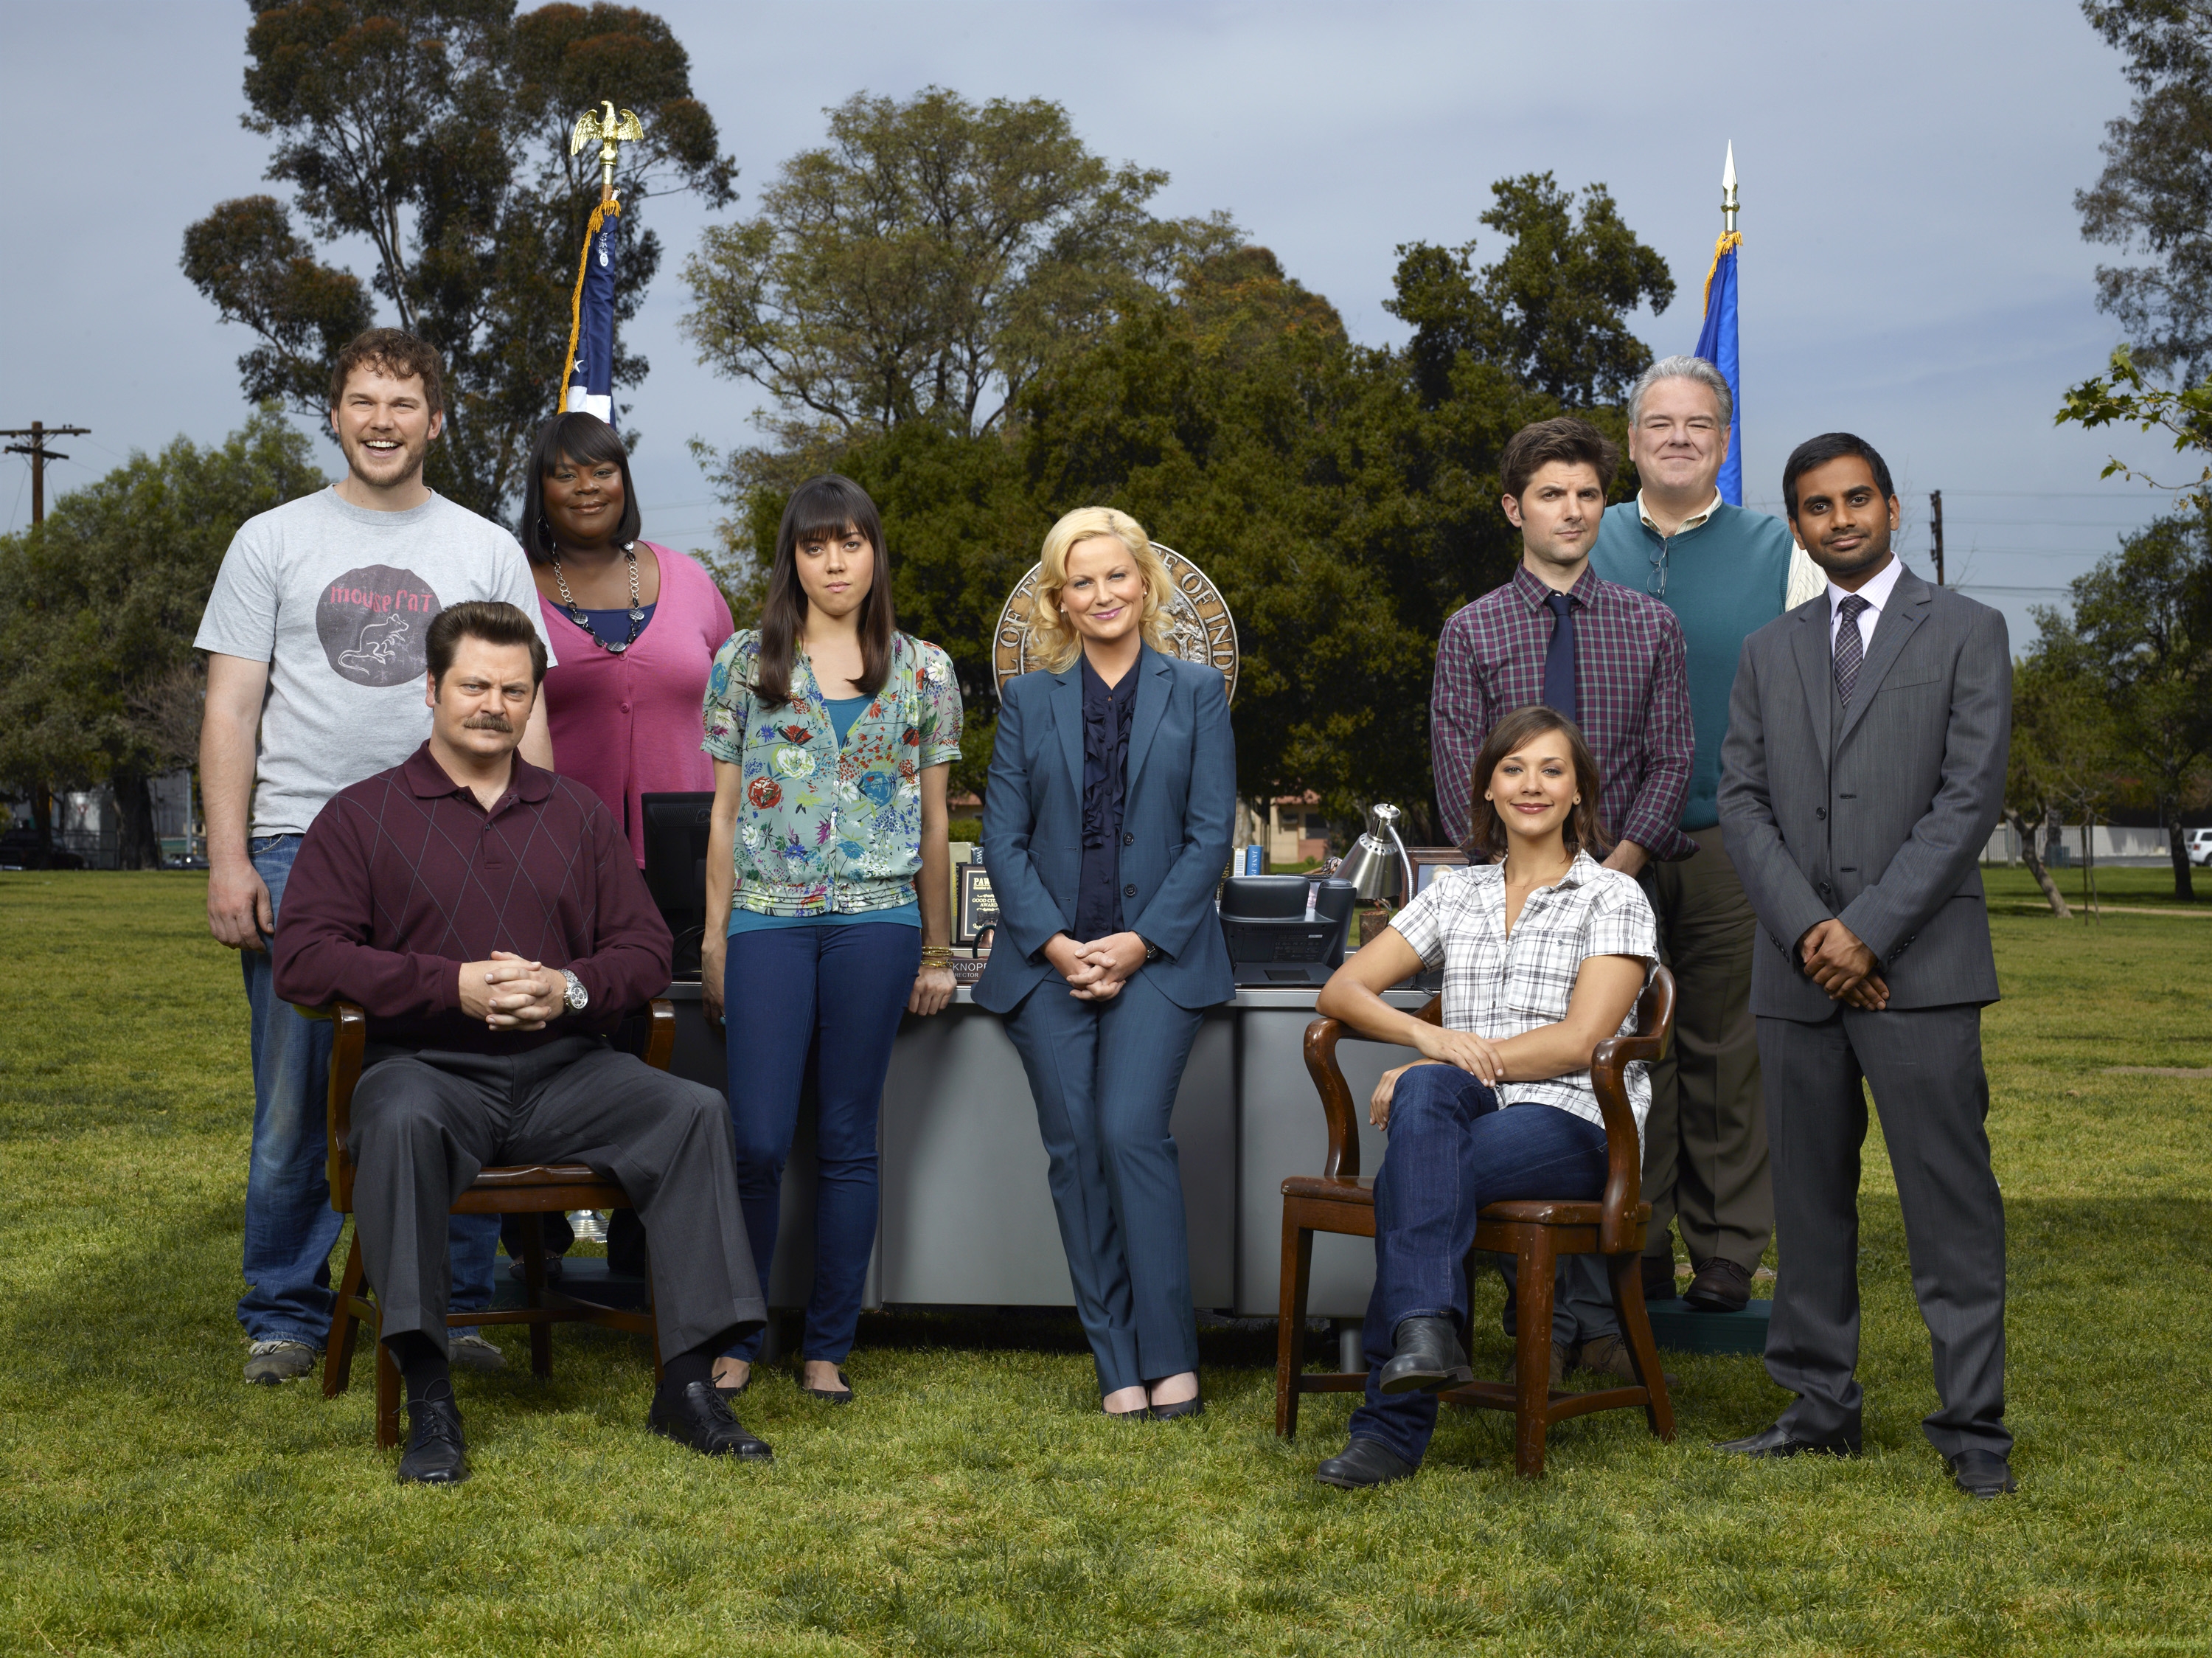 boom competitions - Parks and Recreation season 3 DVD competition